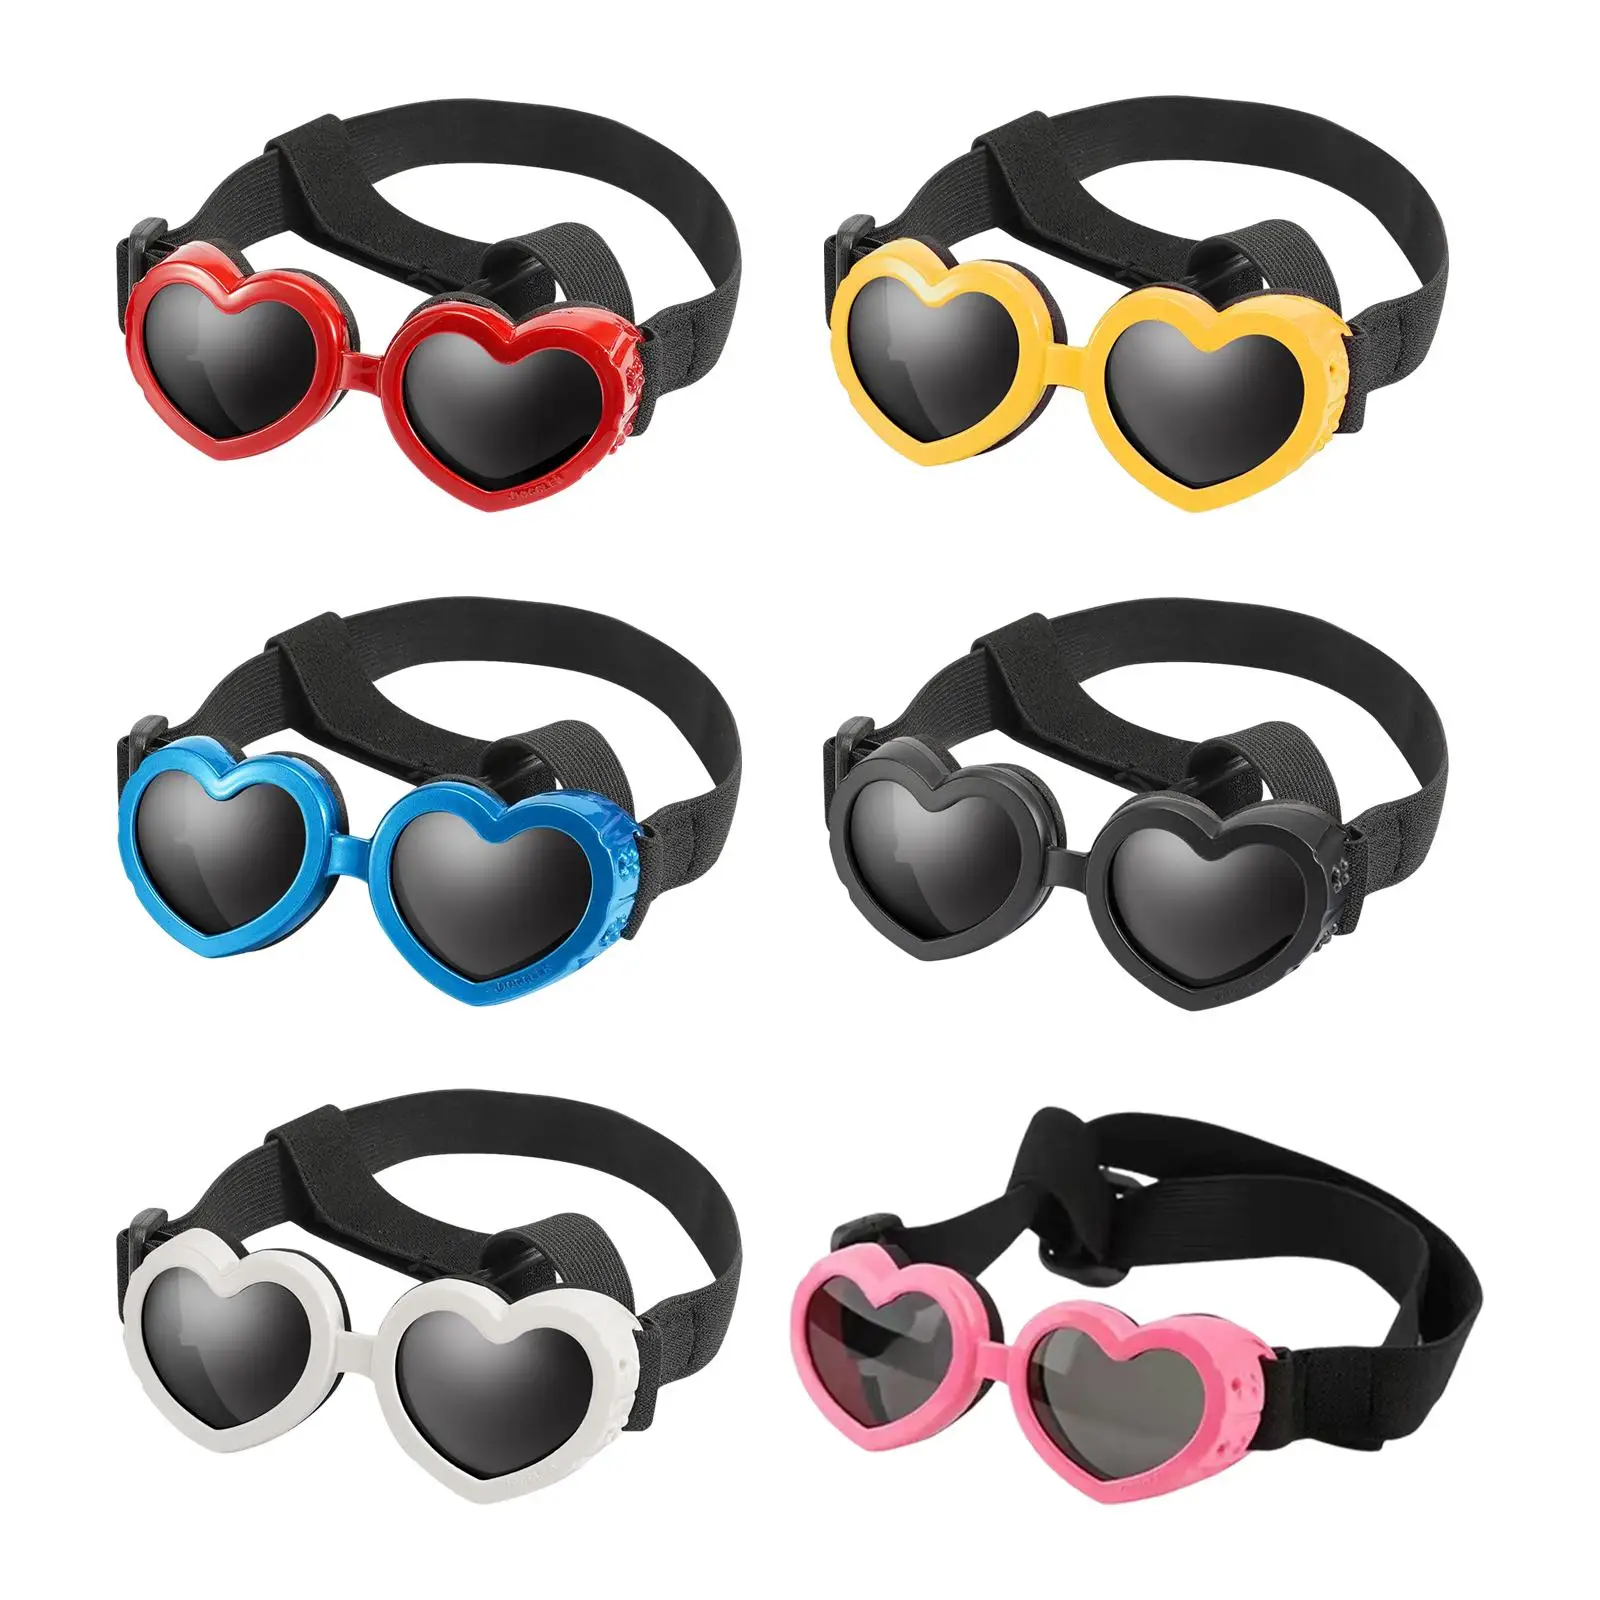 Dog Goggles Eyewear Anti Fog Wind Protection Dogs Cats Pet Glasses Cat Glasses Small Dog Sunglasses Photo Props Dog Accessories